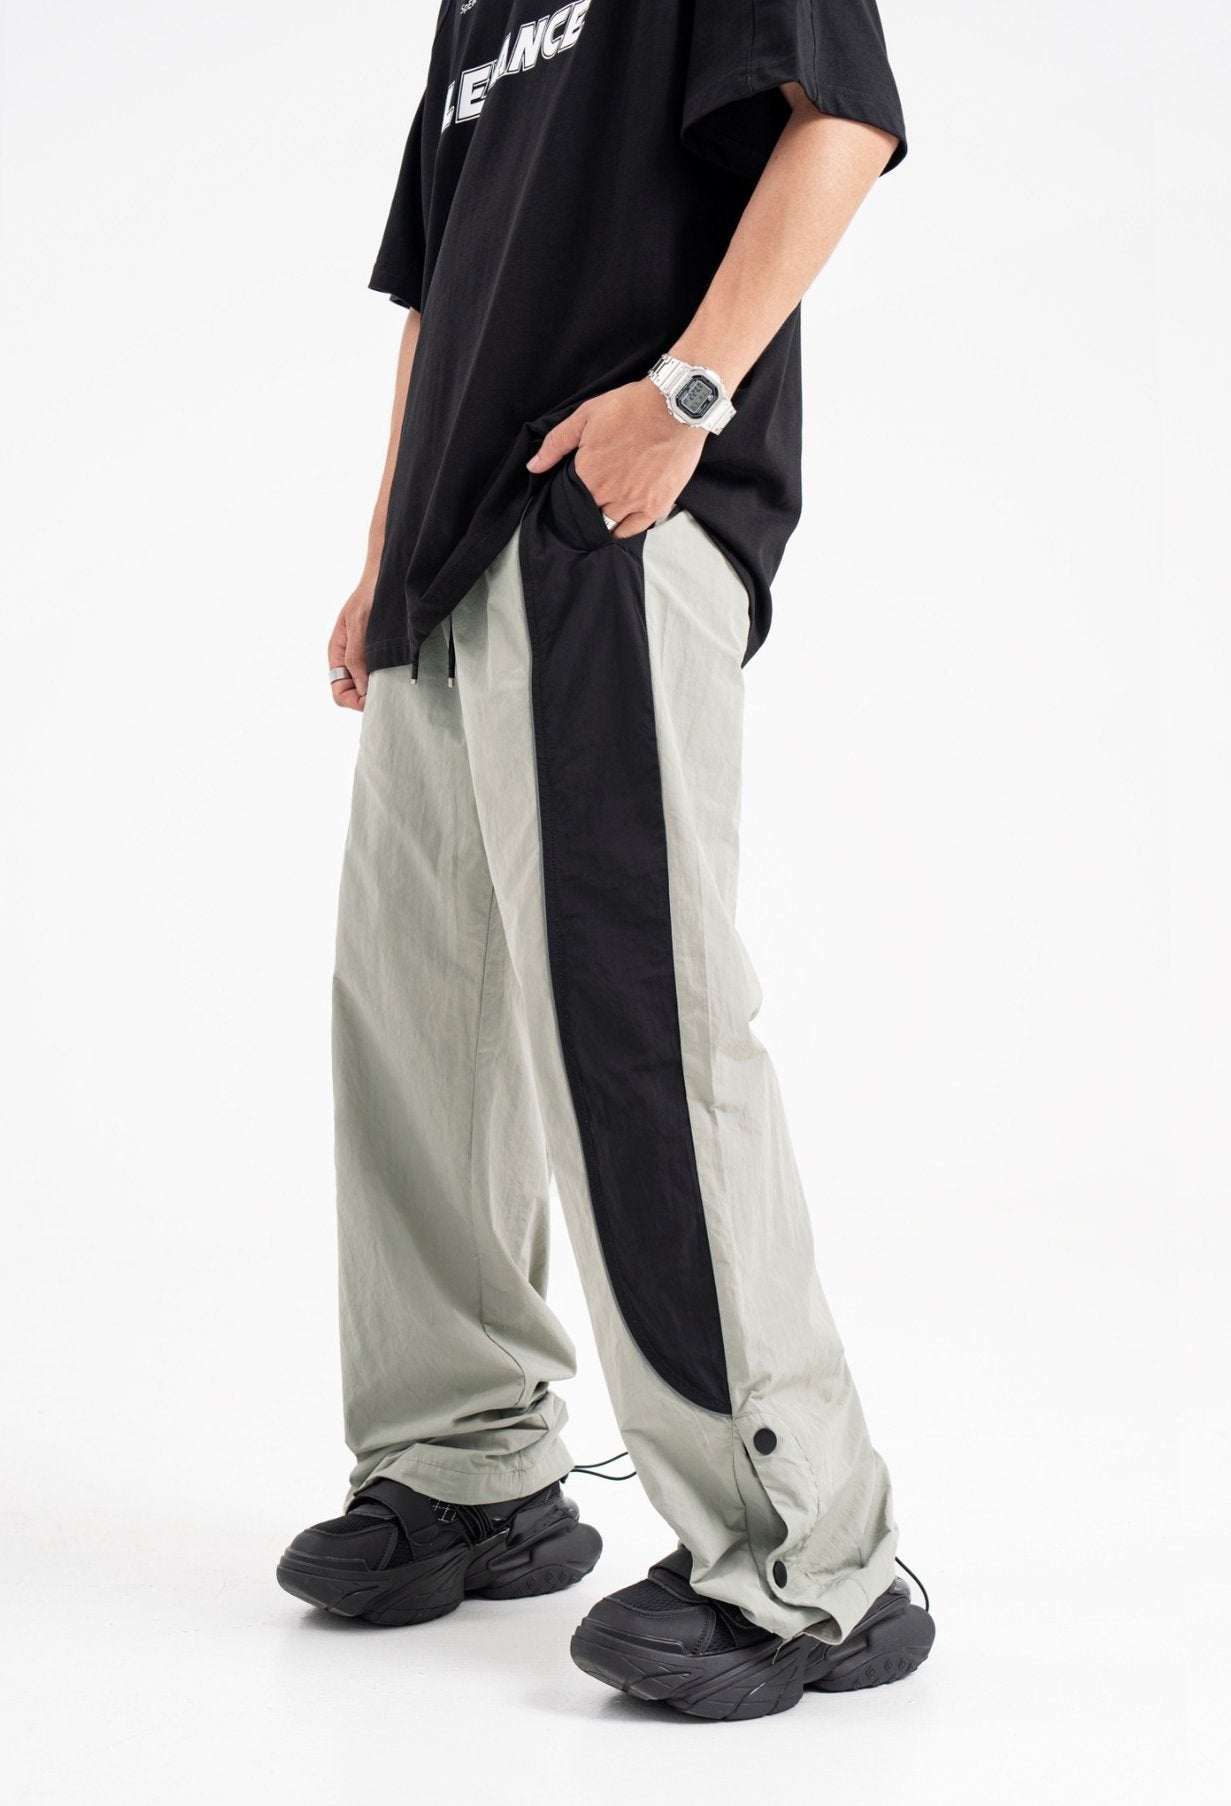 Unisex High Street Color Block Trousers